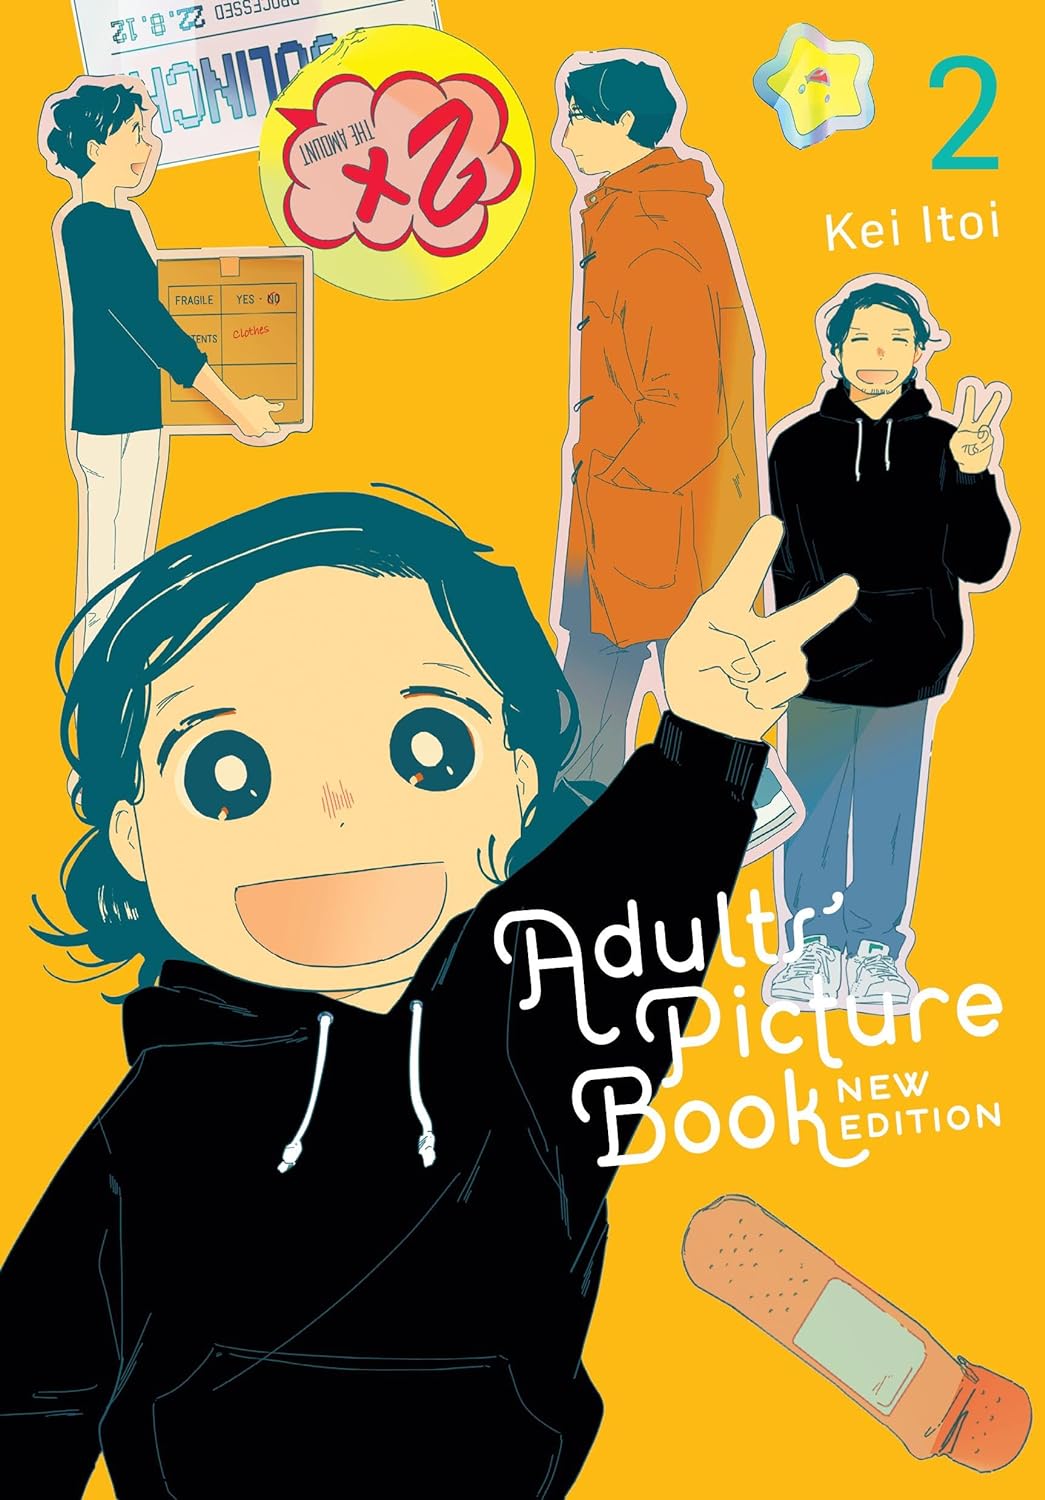 Adults' Picture Book: New Edition Vol. 2